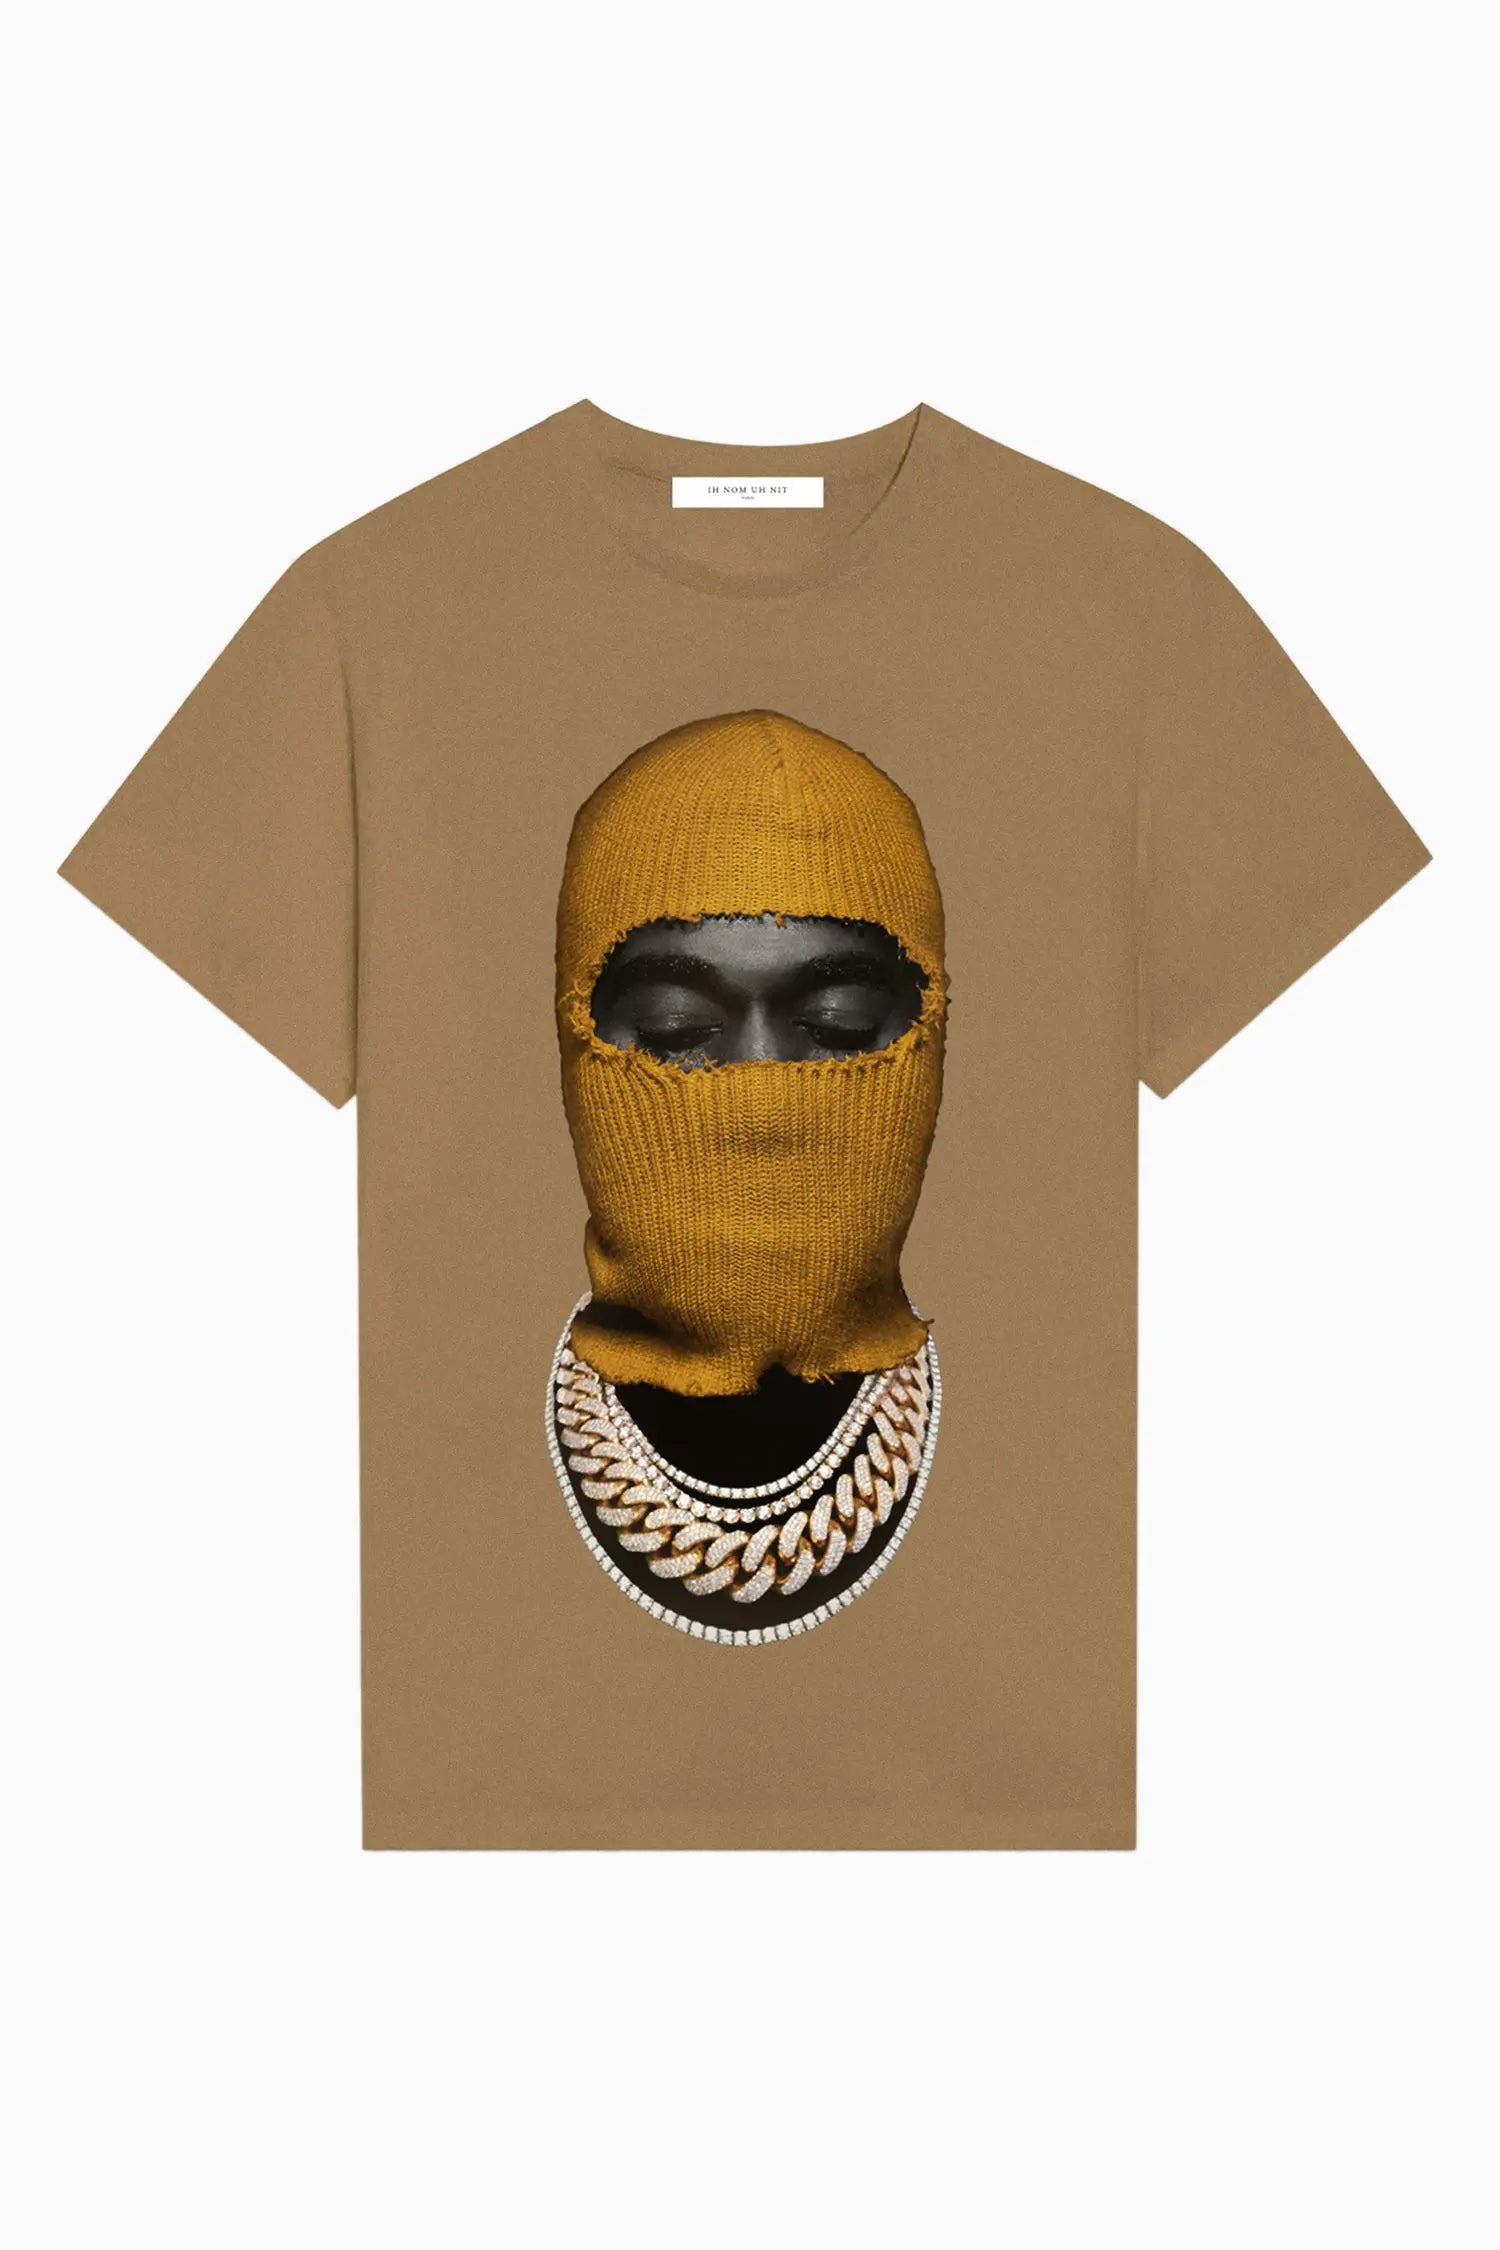 T-shirt with Mask20 - IH NOM UH NIT